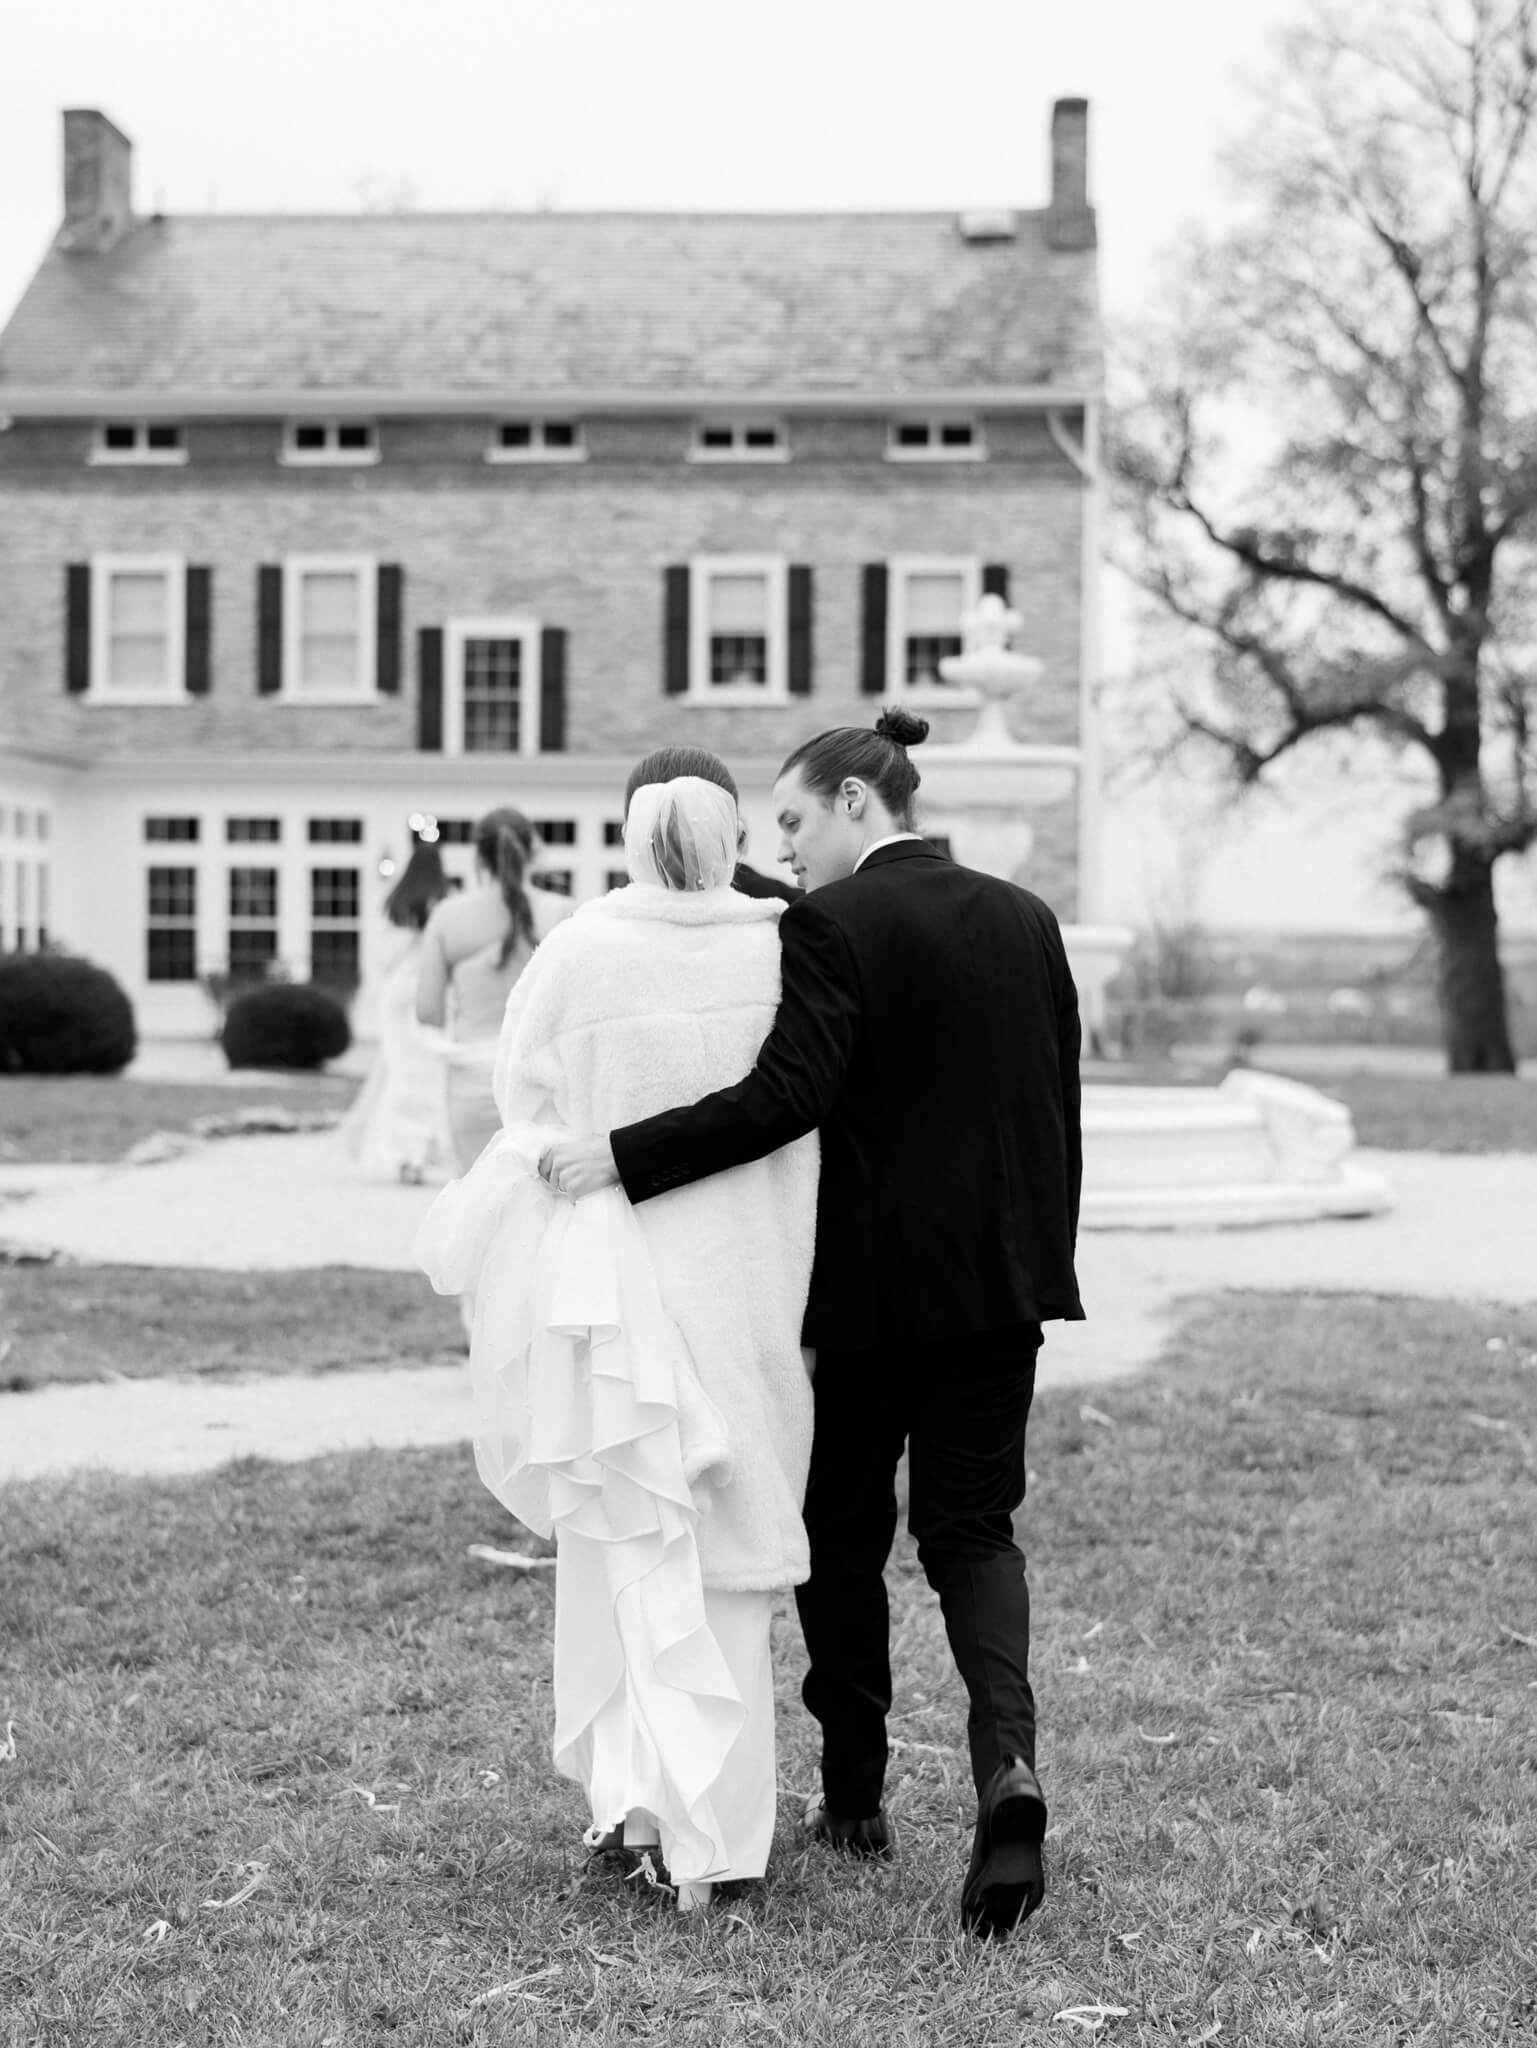 Black and white image of the bride and groom walking away towards their venue while the groom carries the back of the bride's gown.